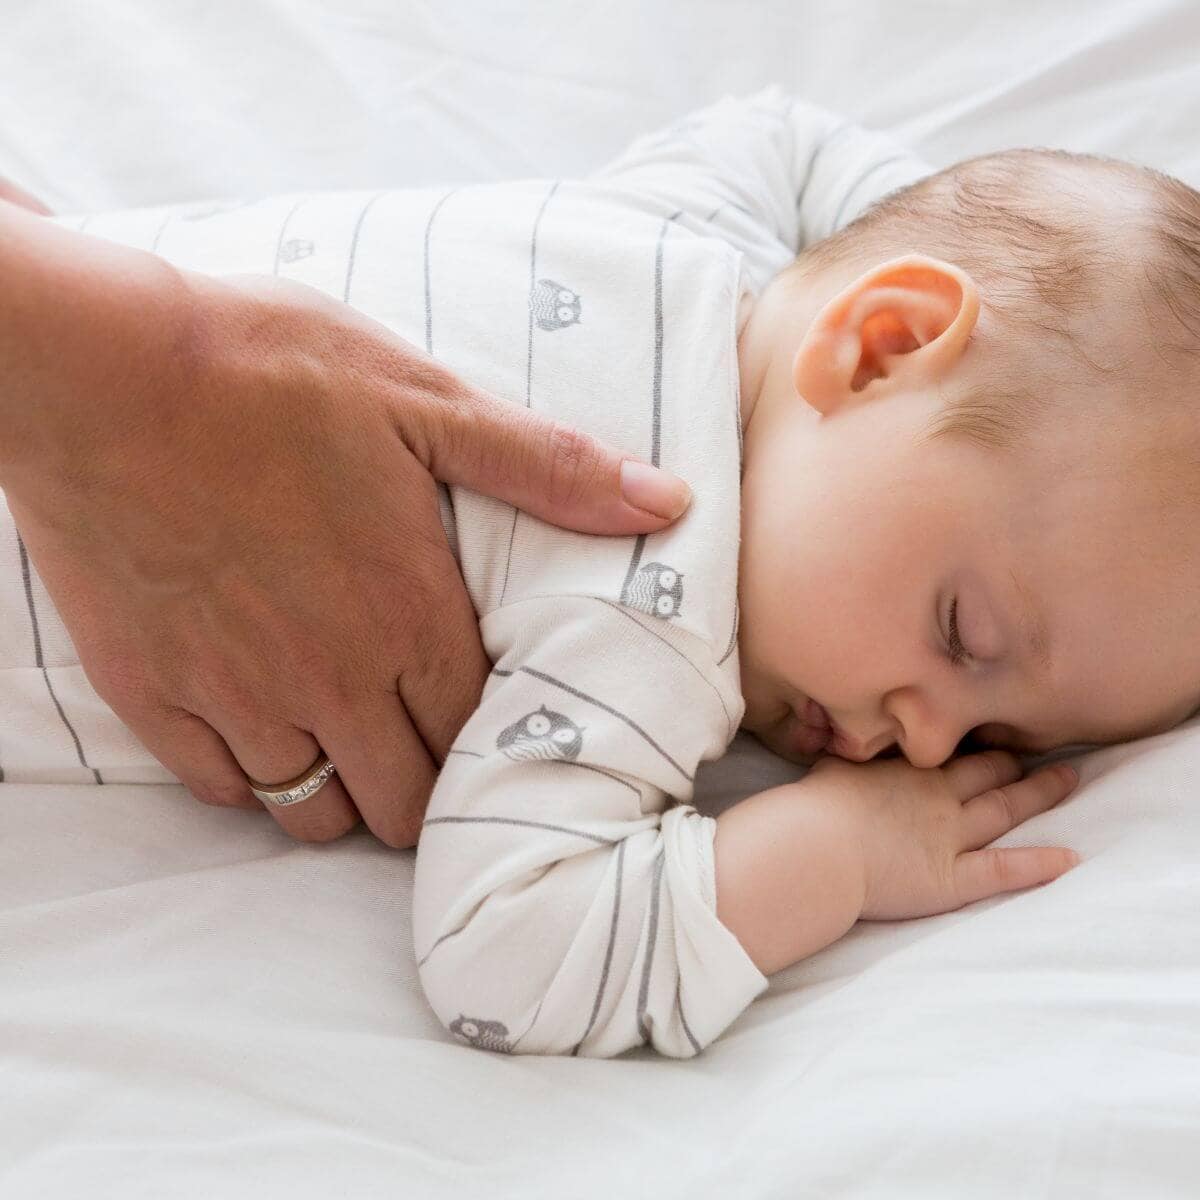 A baby boy is laying on his stomach sleeping on a white sheet. A man's hand is on the side of the baby.